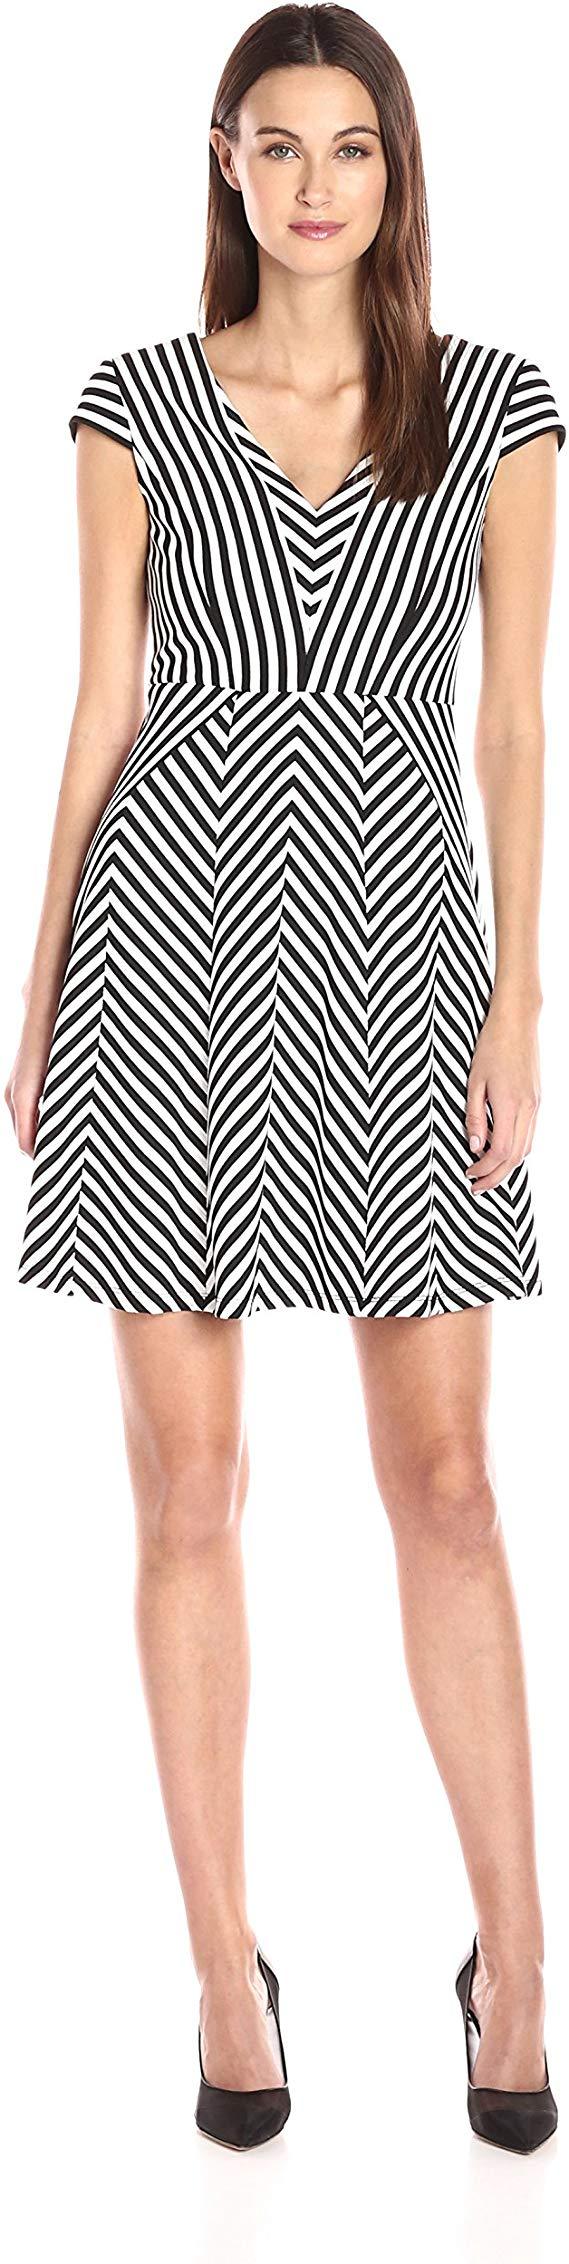 Adrianna Papell - AP1D100624 Striped V-Neck A-Line Short Dress In Black and White